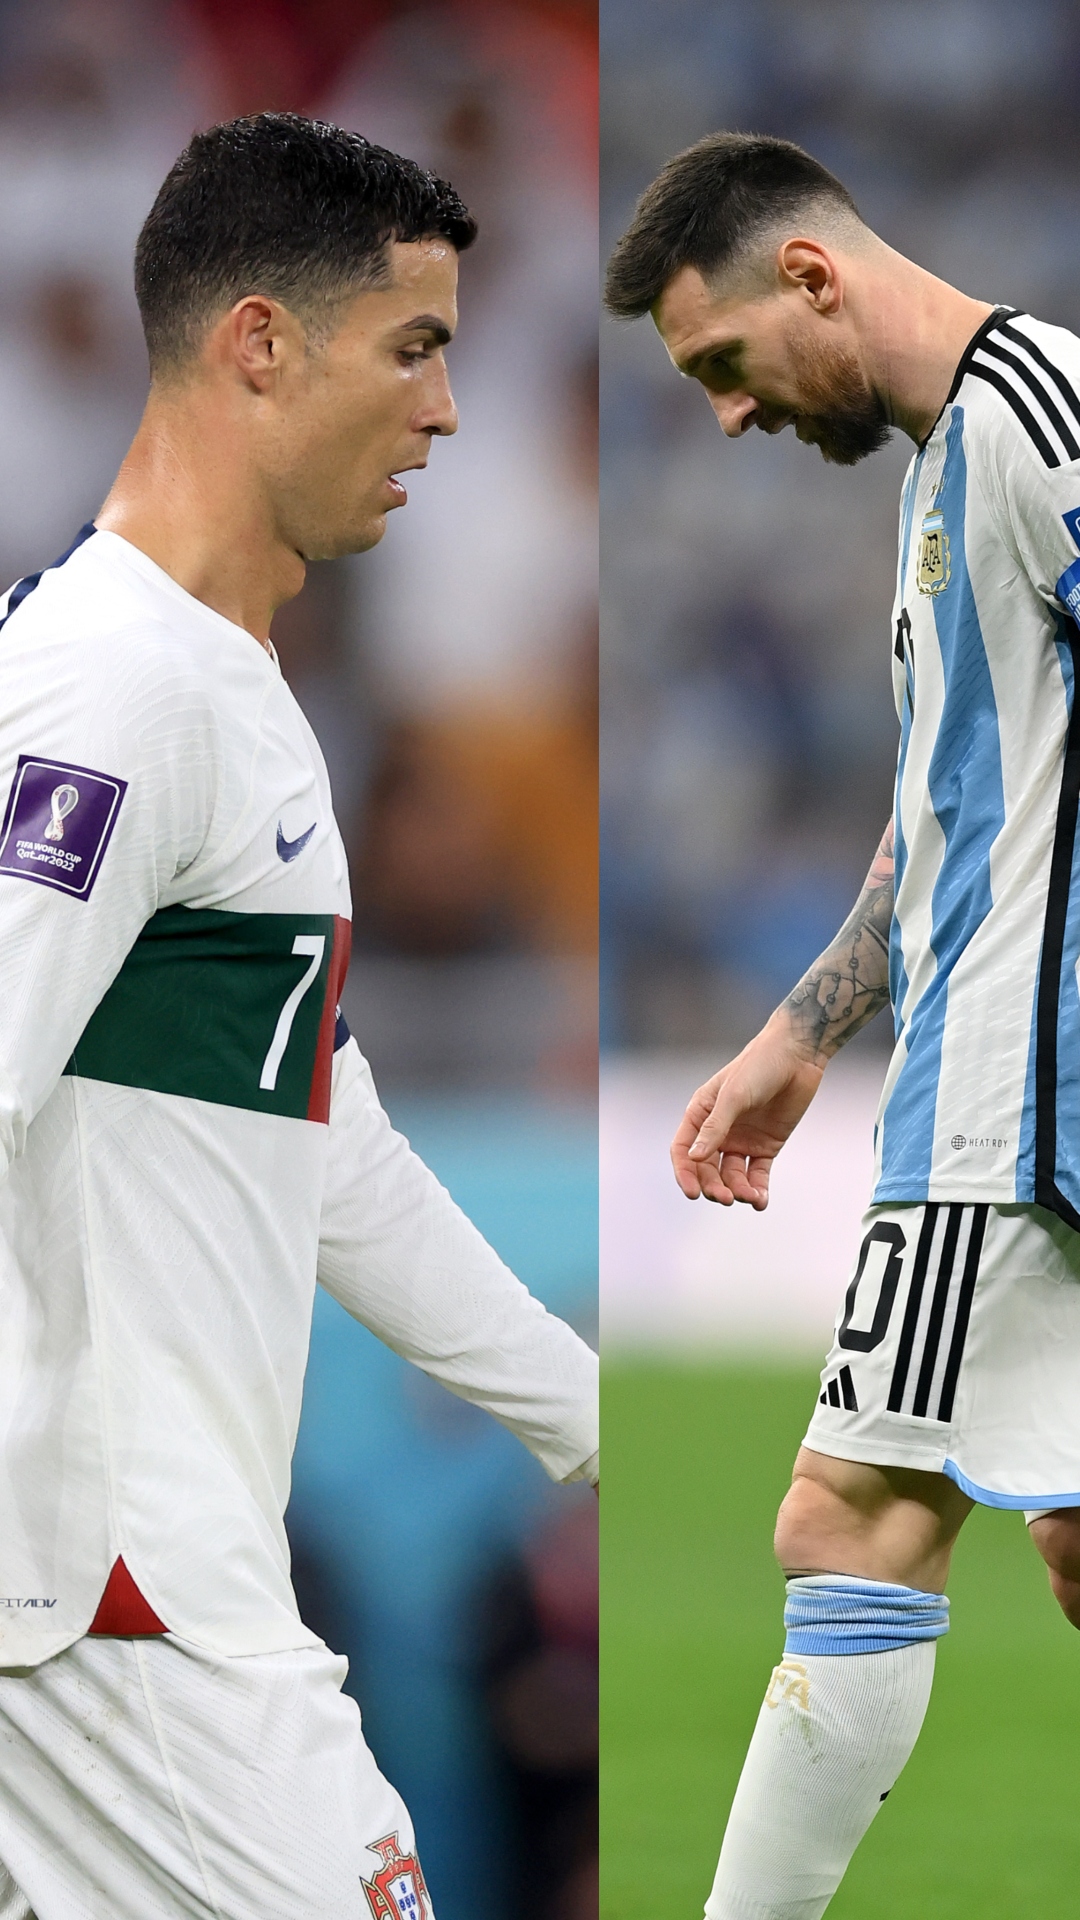 Cristiano Ronaldo vs Lionel Messi in 2022, including their numbers for club and country